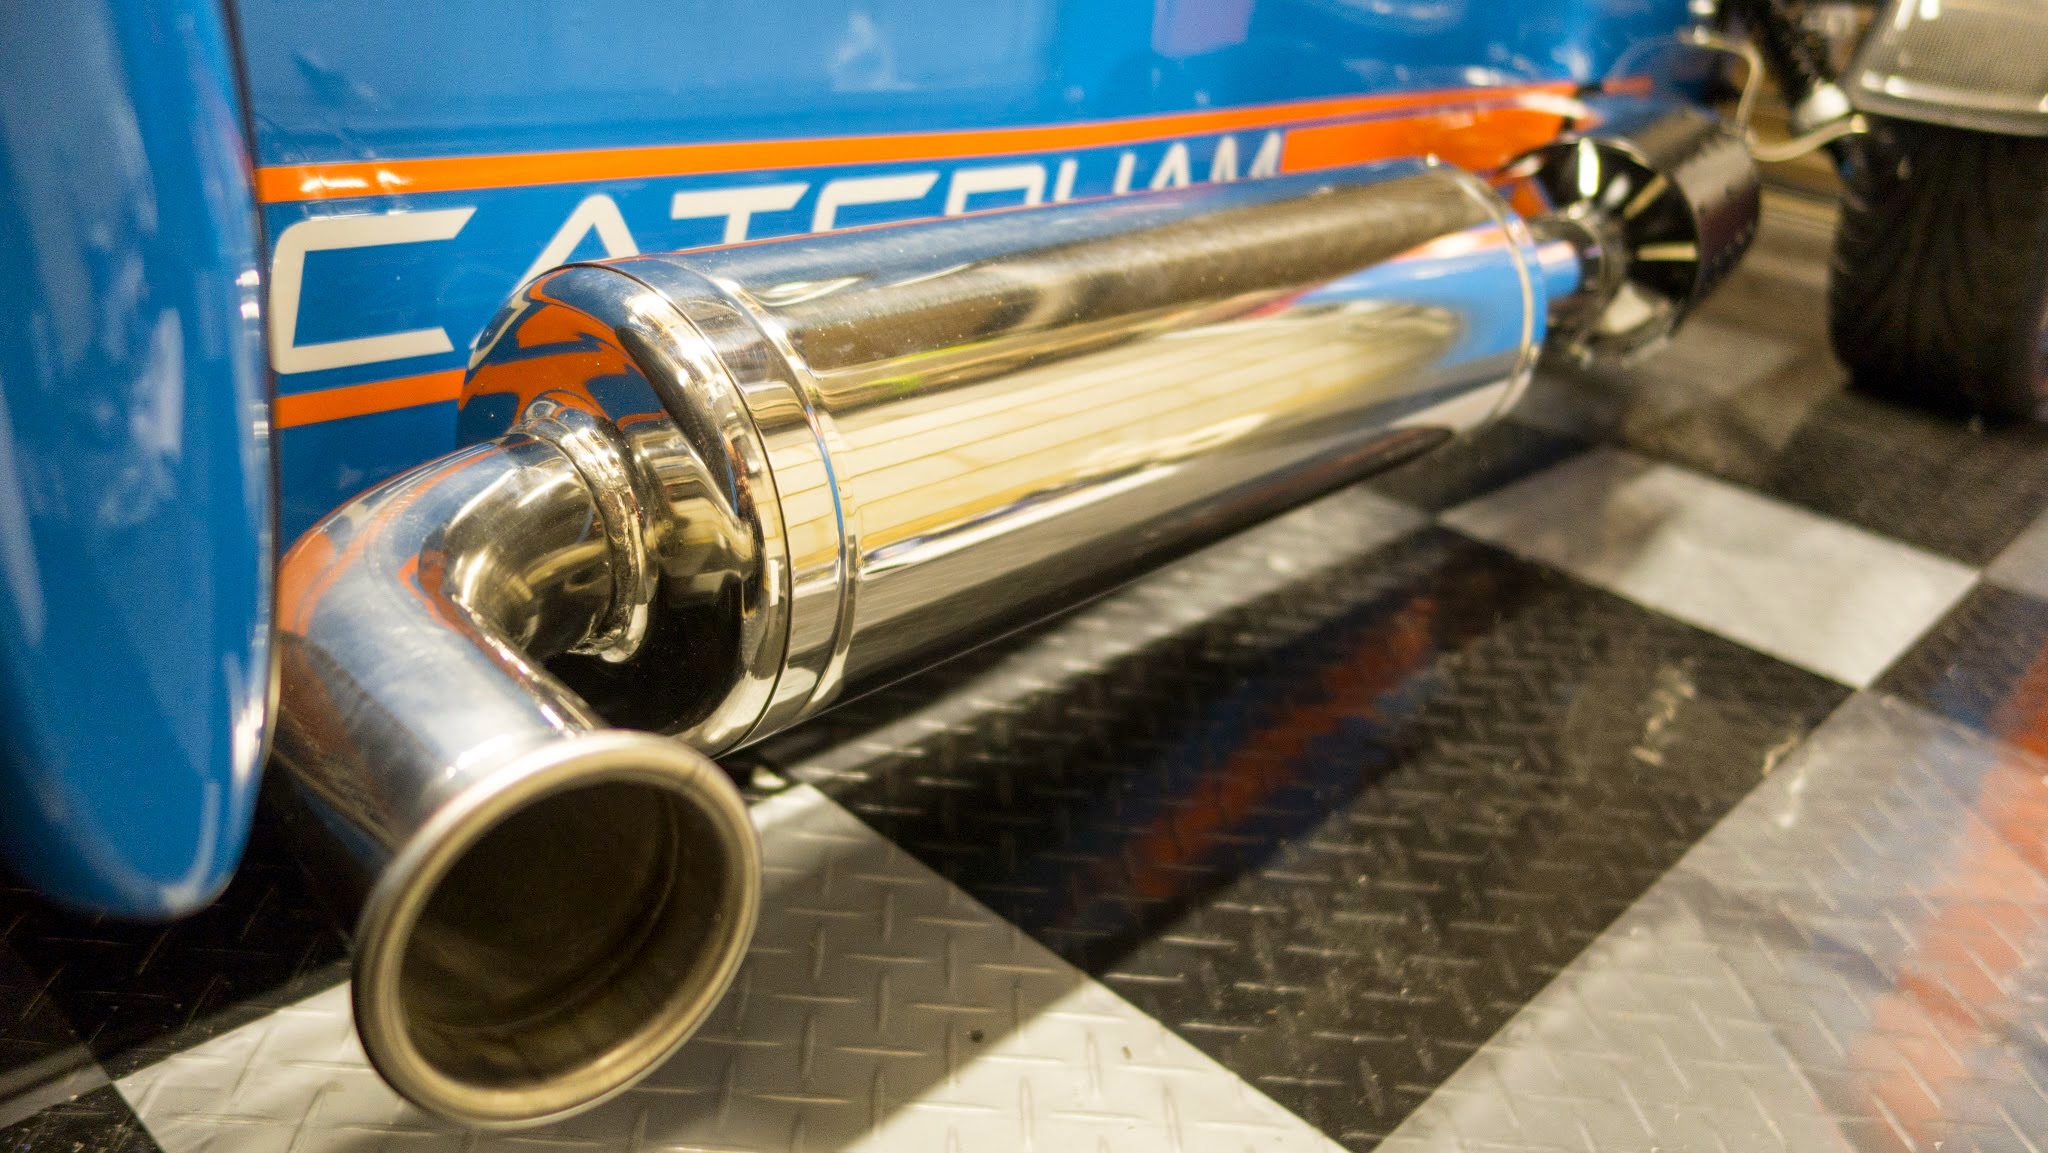 Exhaust fitted to Caterham R500.